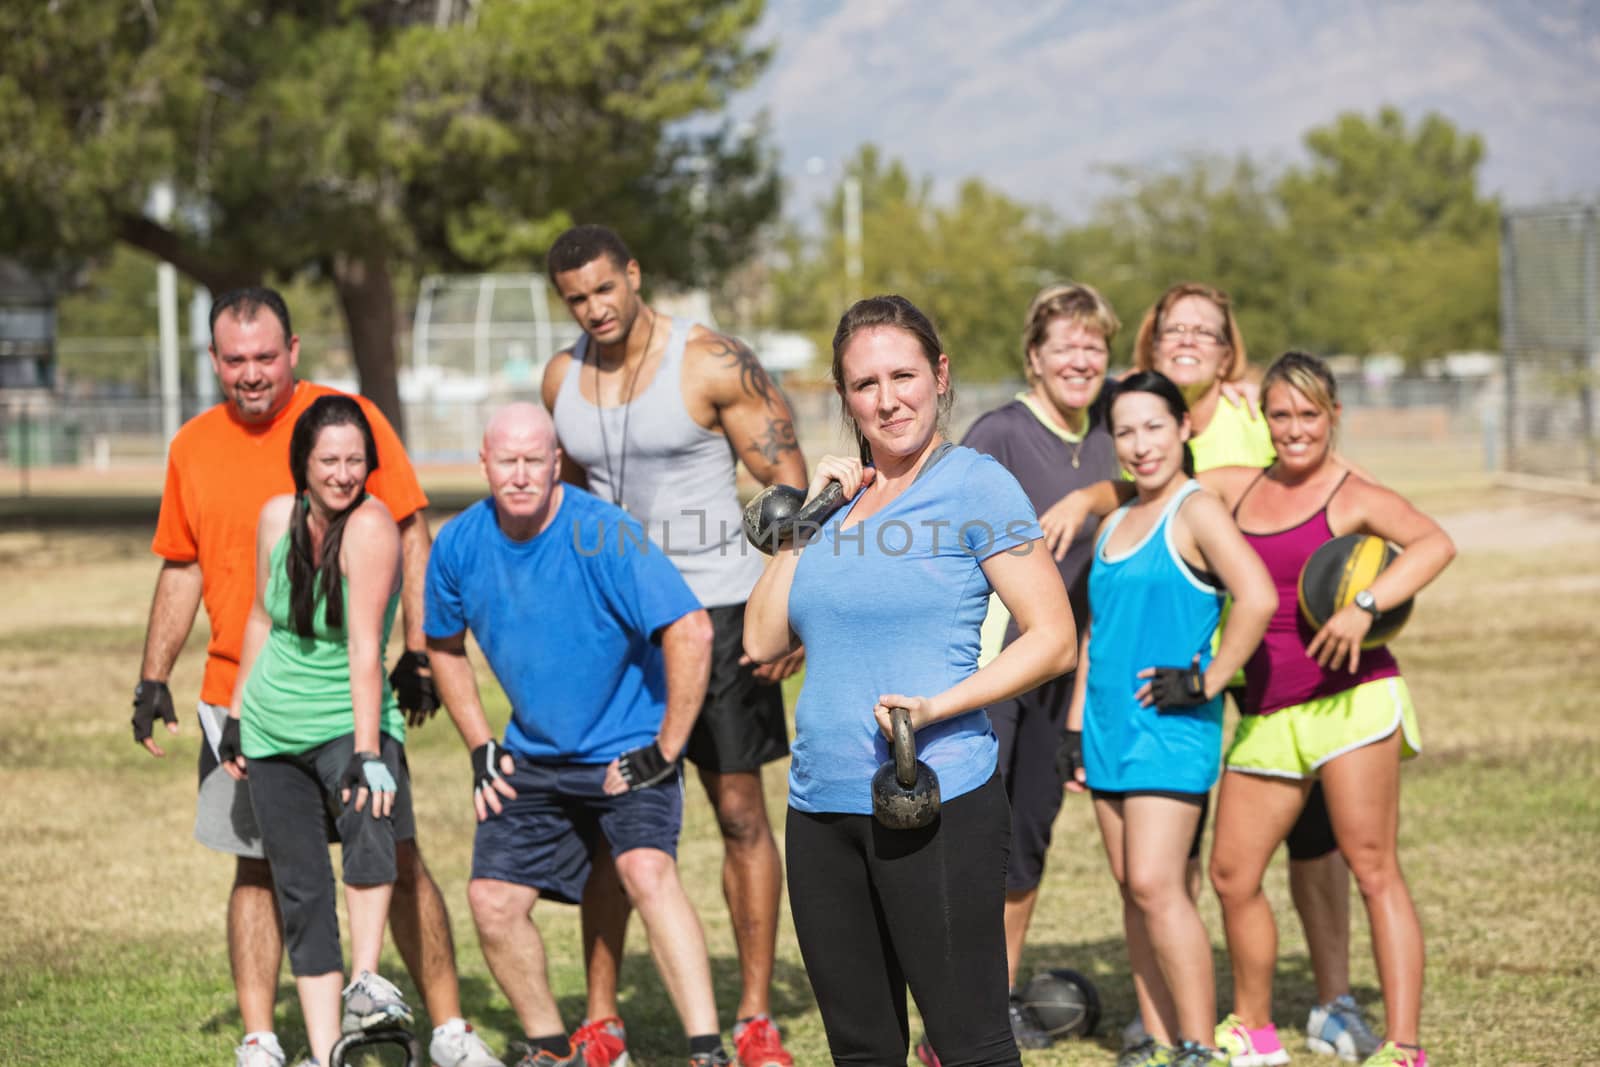 Confident young lady with group lifting weights outdoors